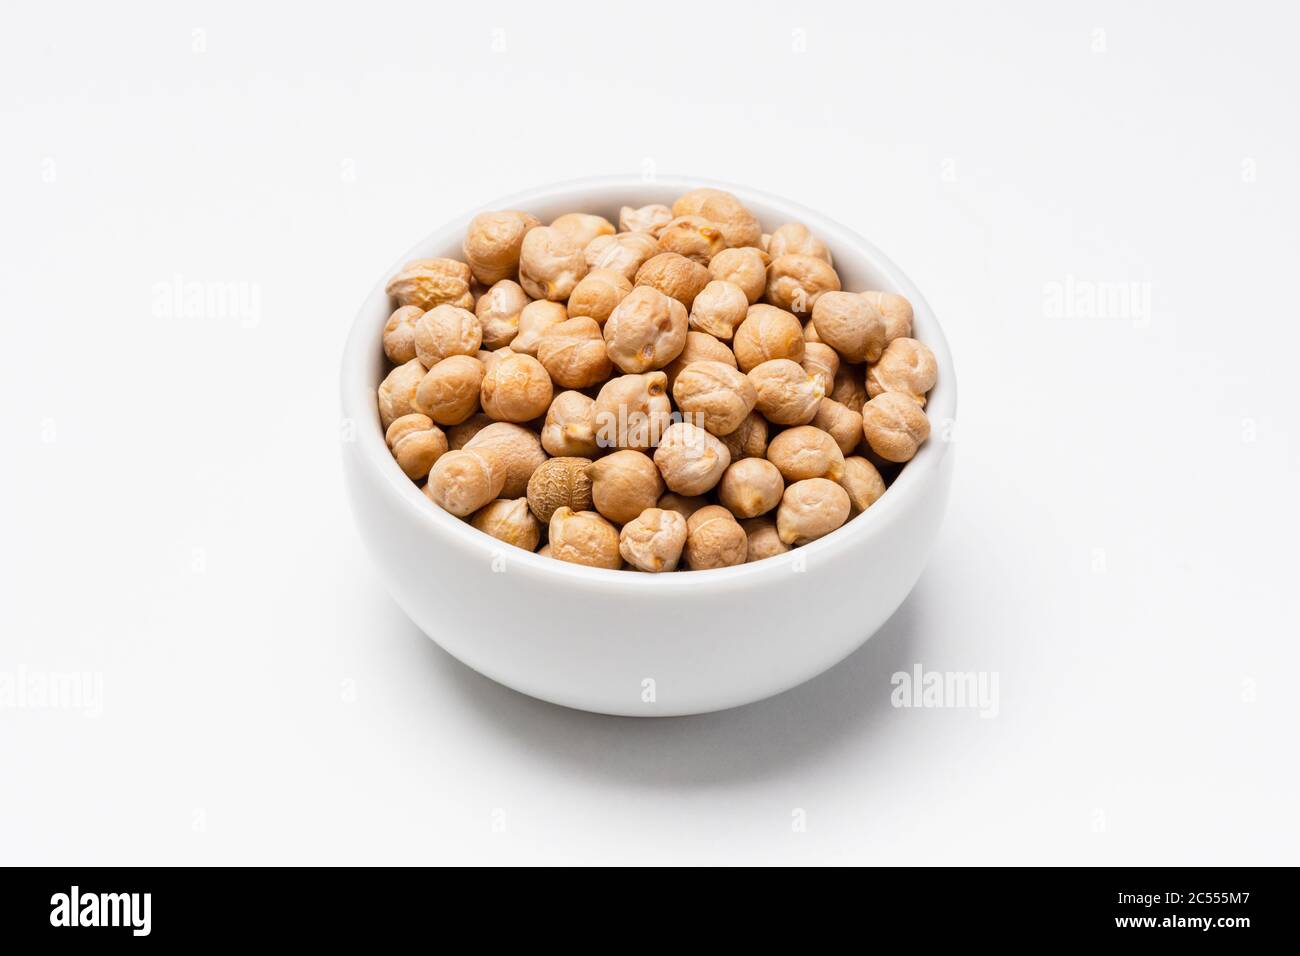 Chickpeas bowl on white background. These uncooked chickpeas are common staple food ingredients. Also called pulses (dry edible seeds of plants), they Stock Photo